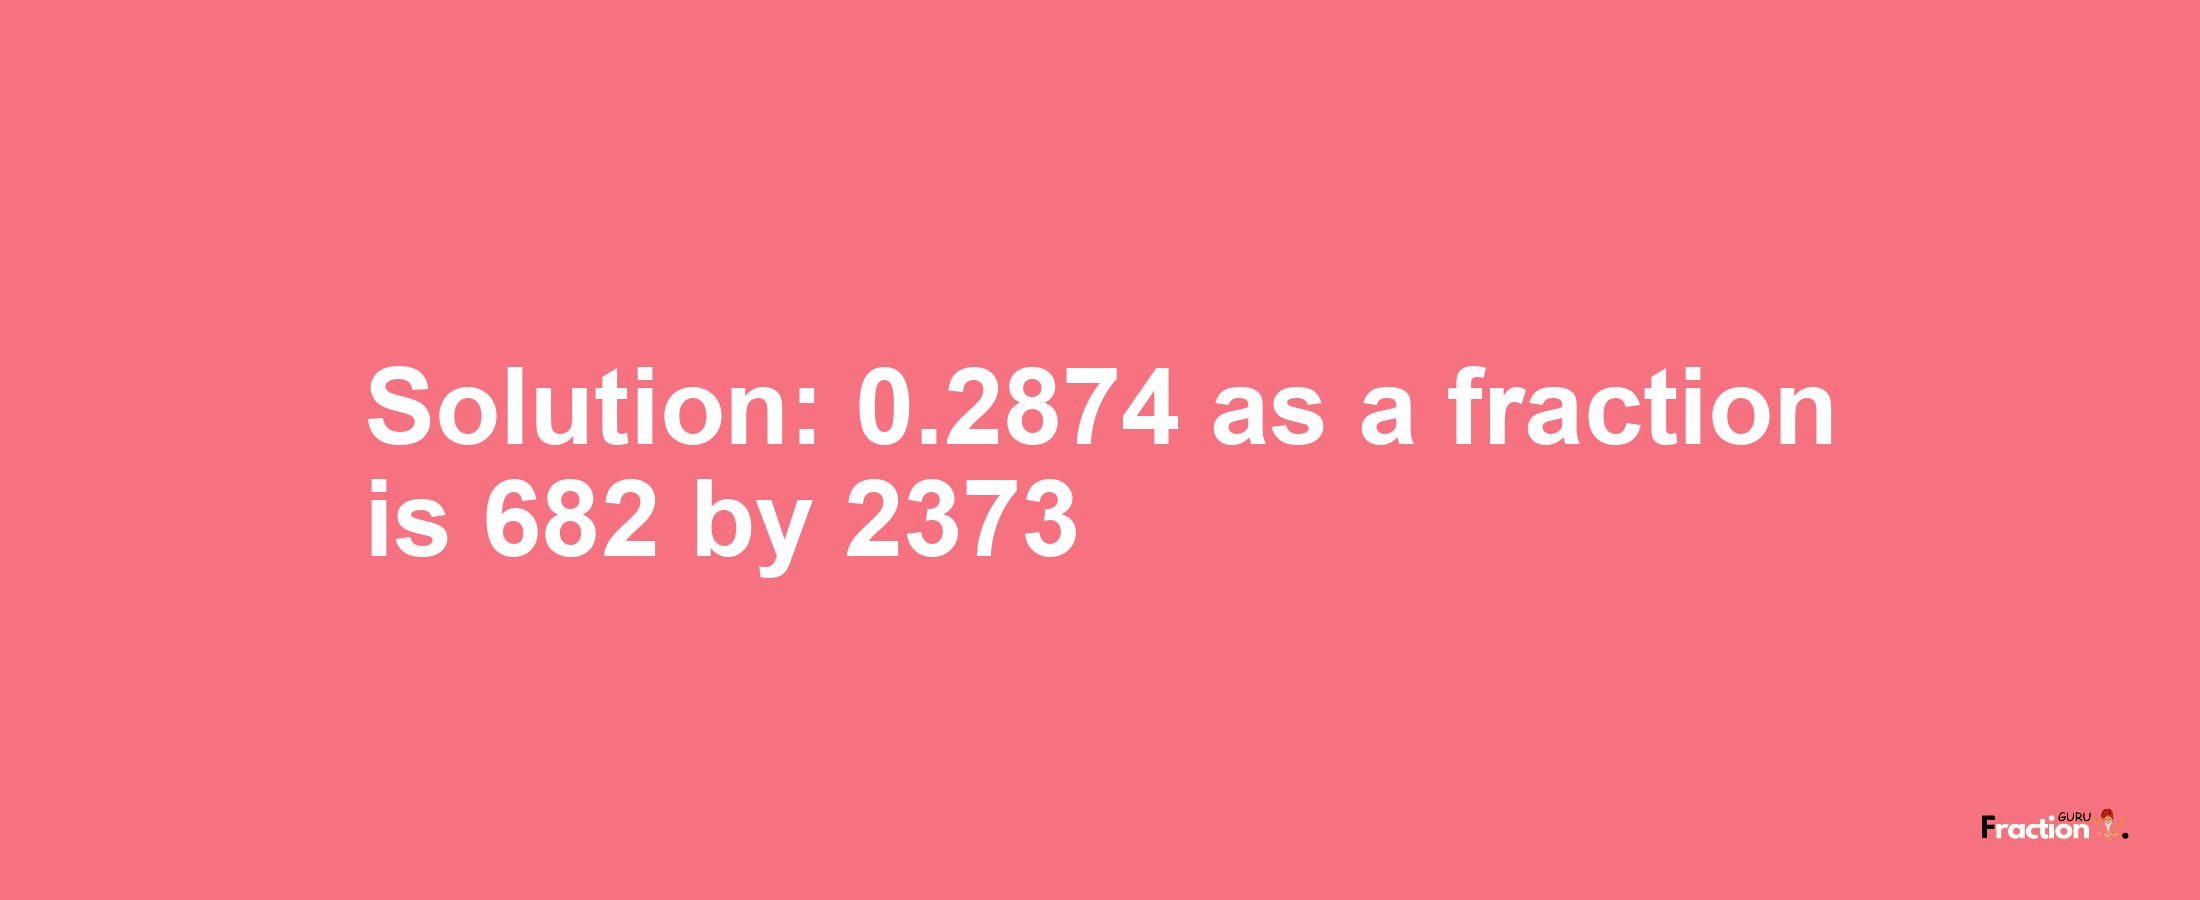 Solution:0.2874 as a fraction is 682/2373